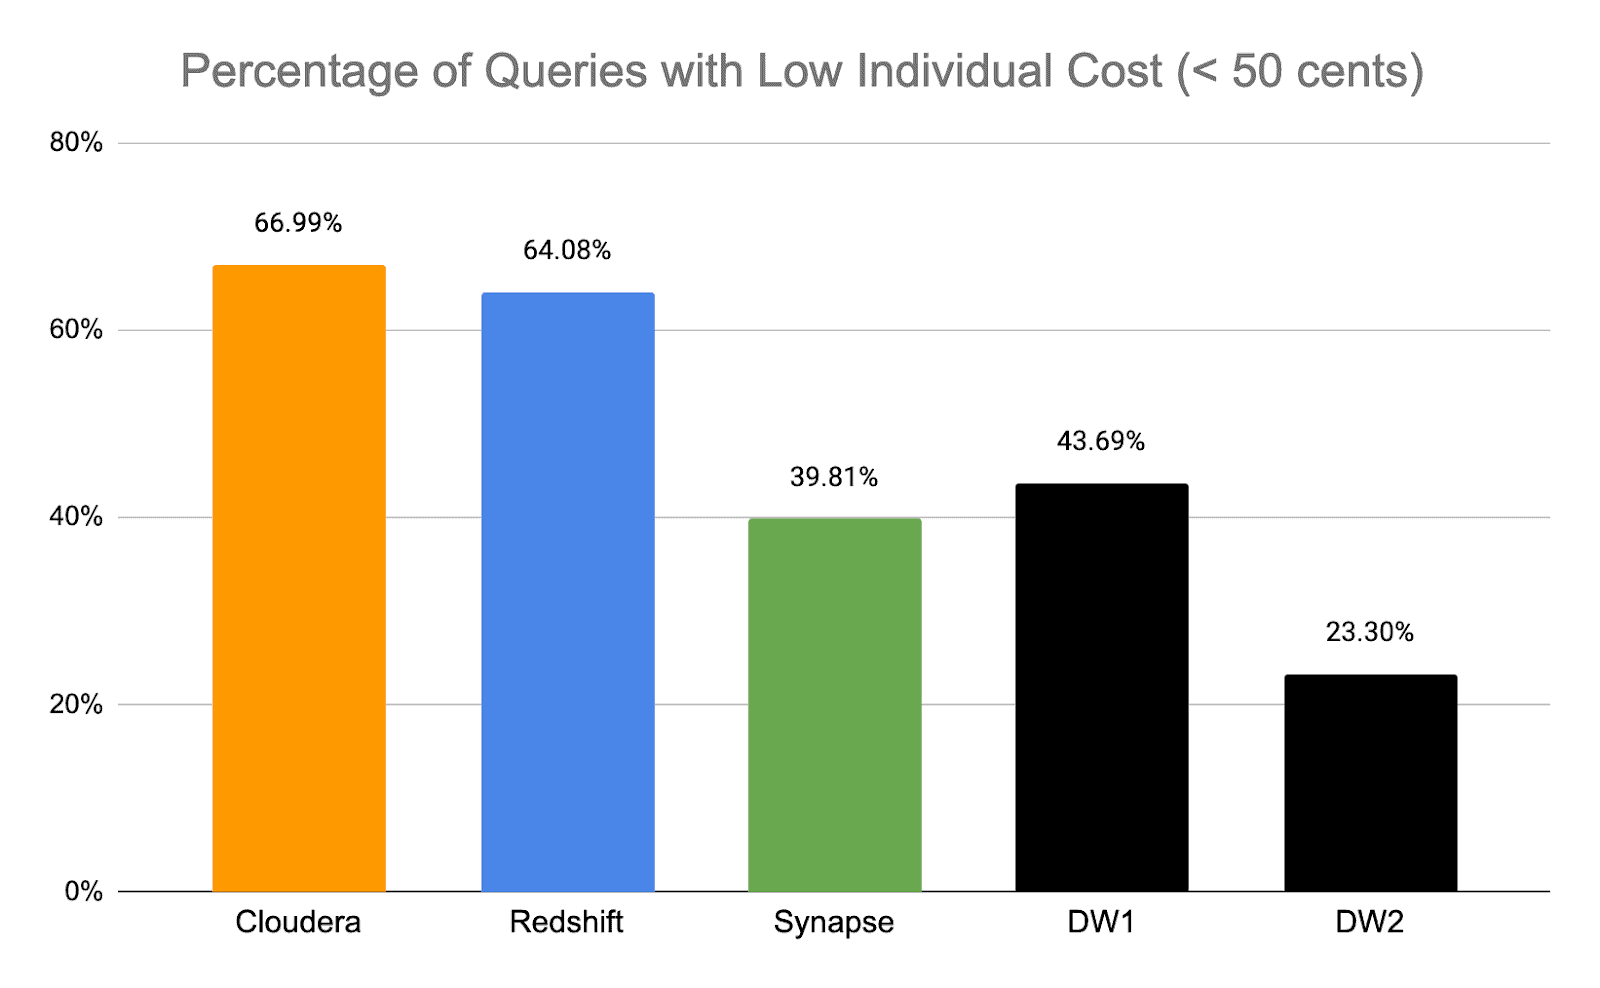 Percentage of Queries with low individual cost